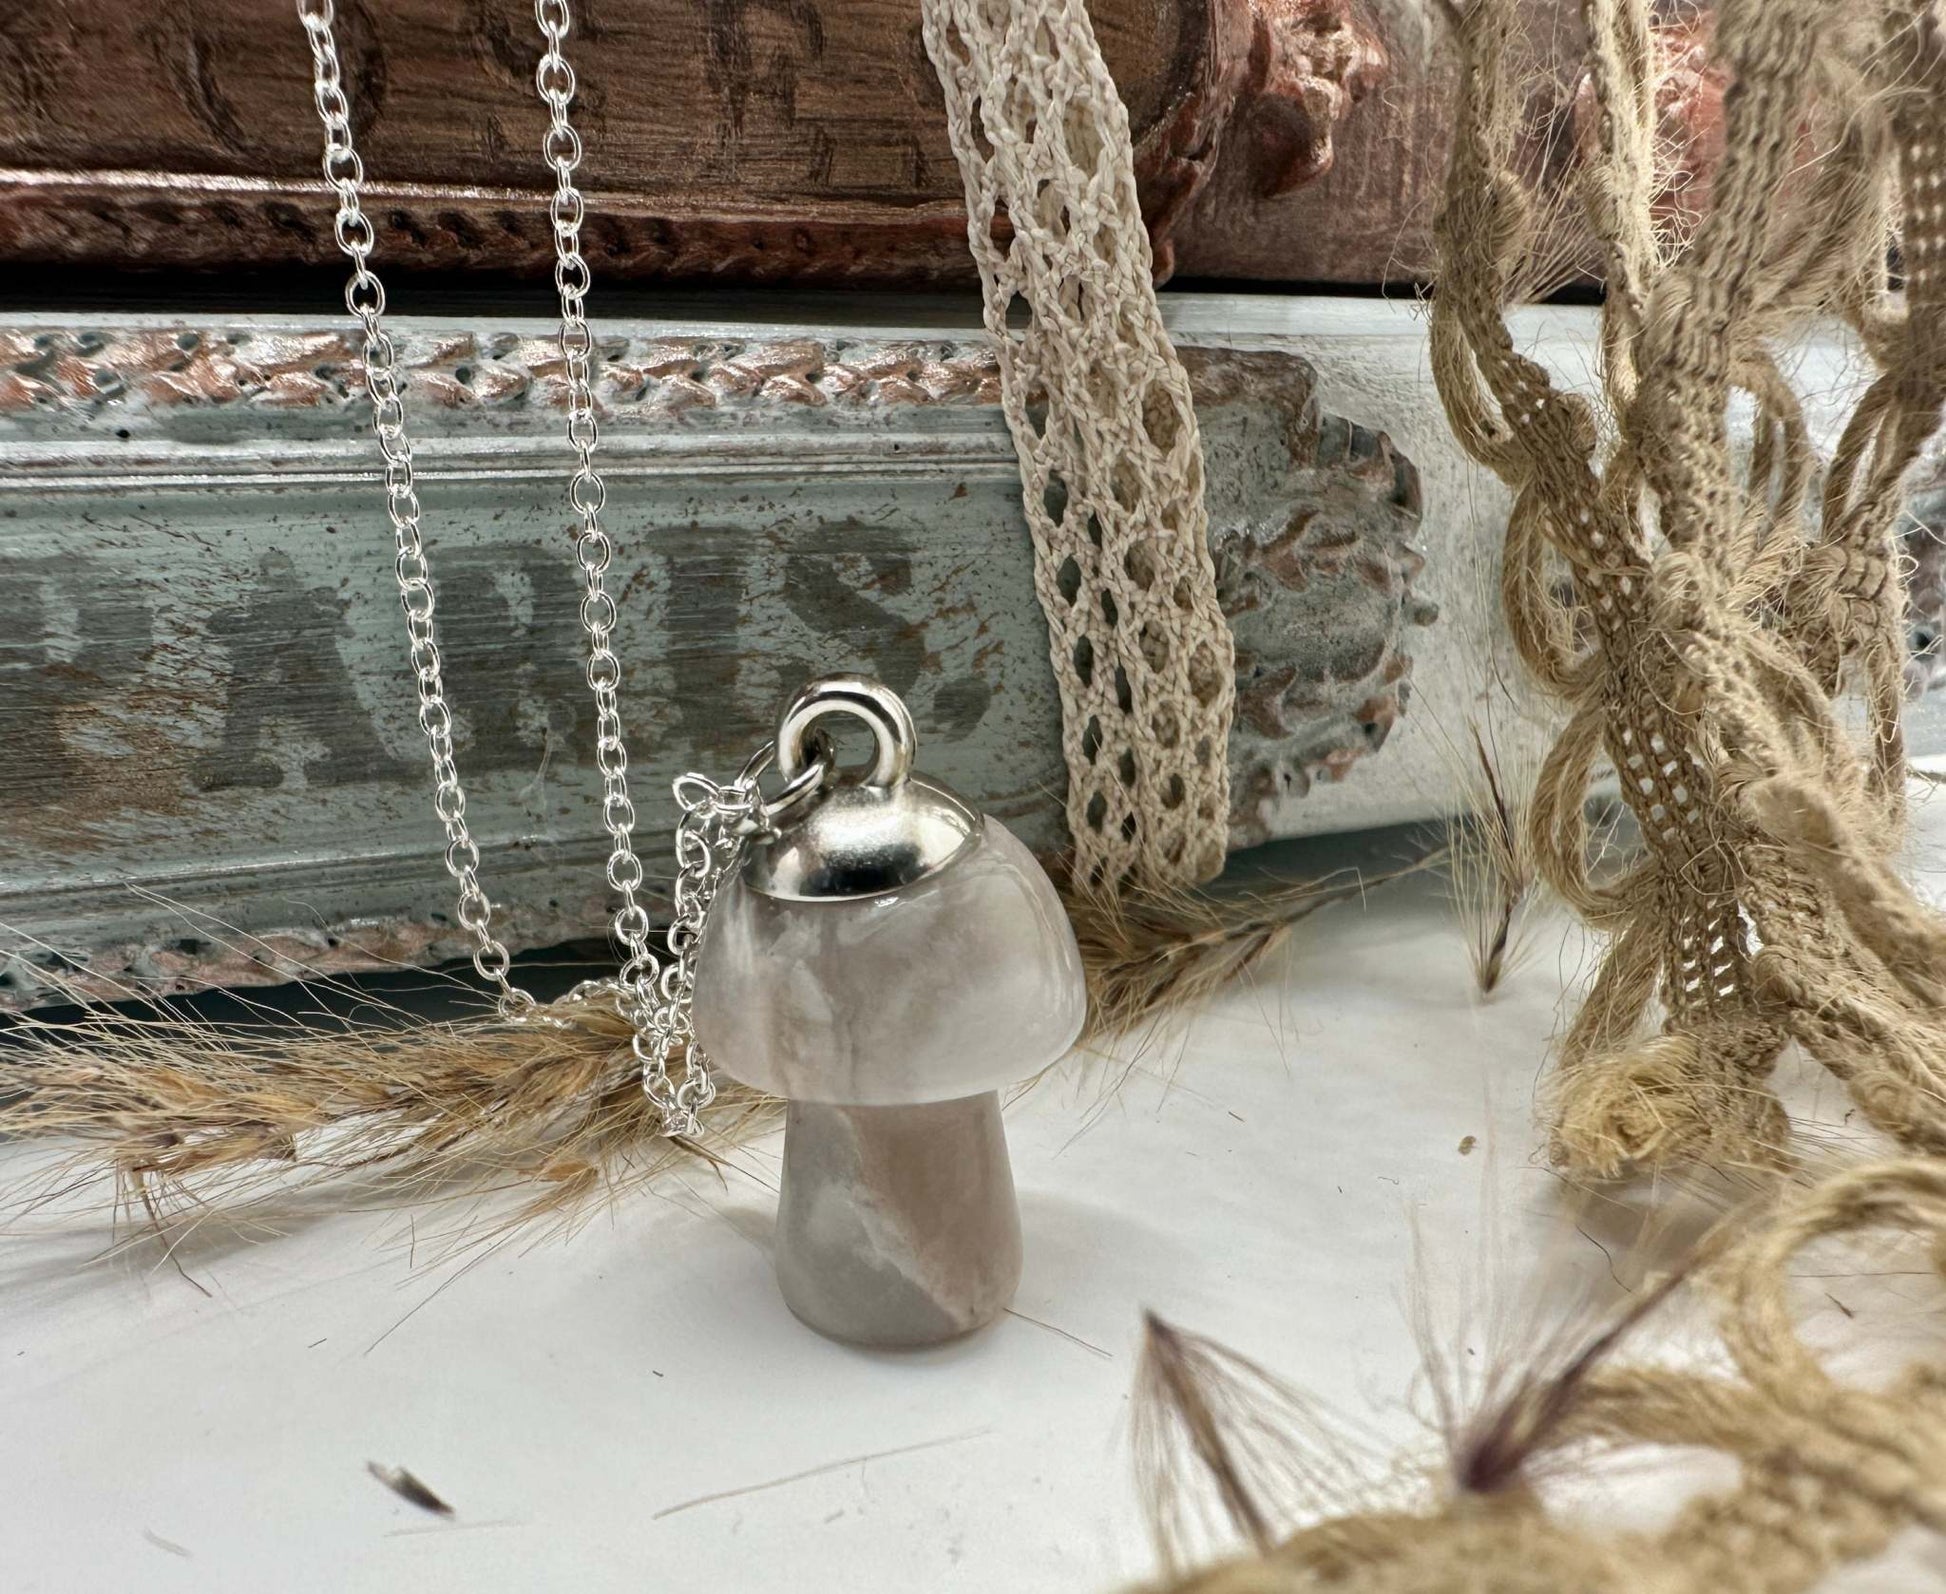 A flower agate mushroom shaped gemstone necklace hangs from a silver chain